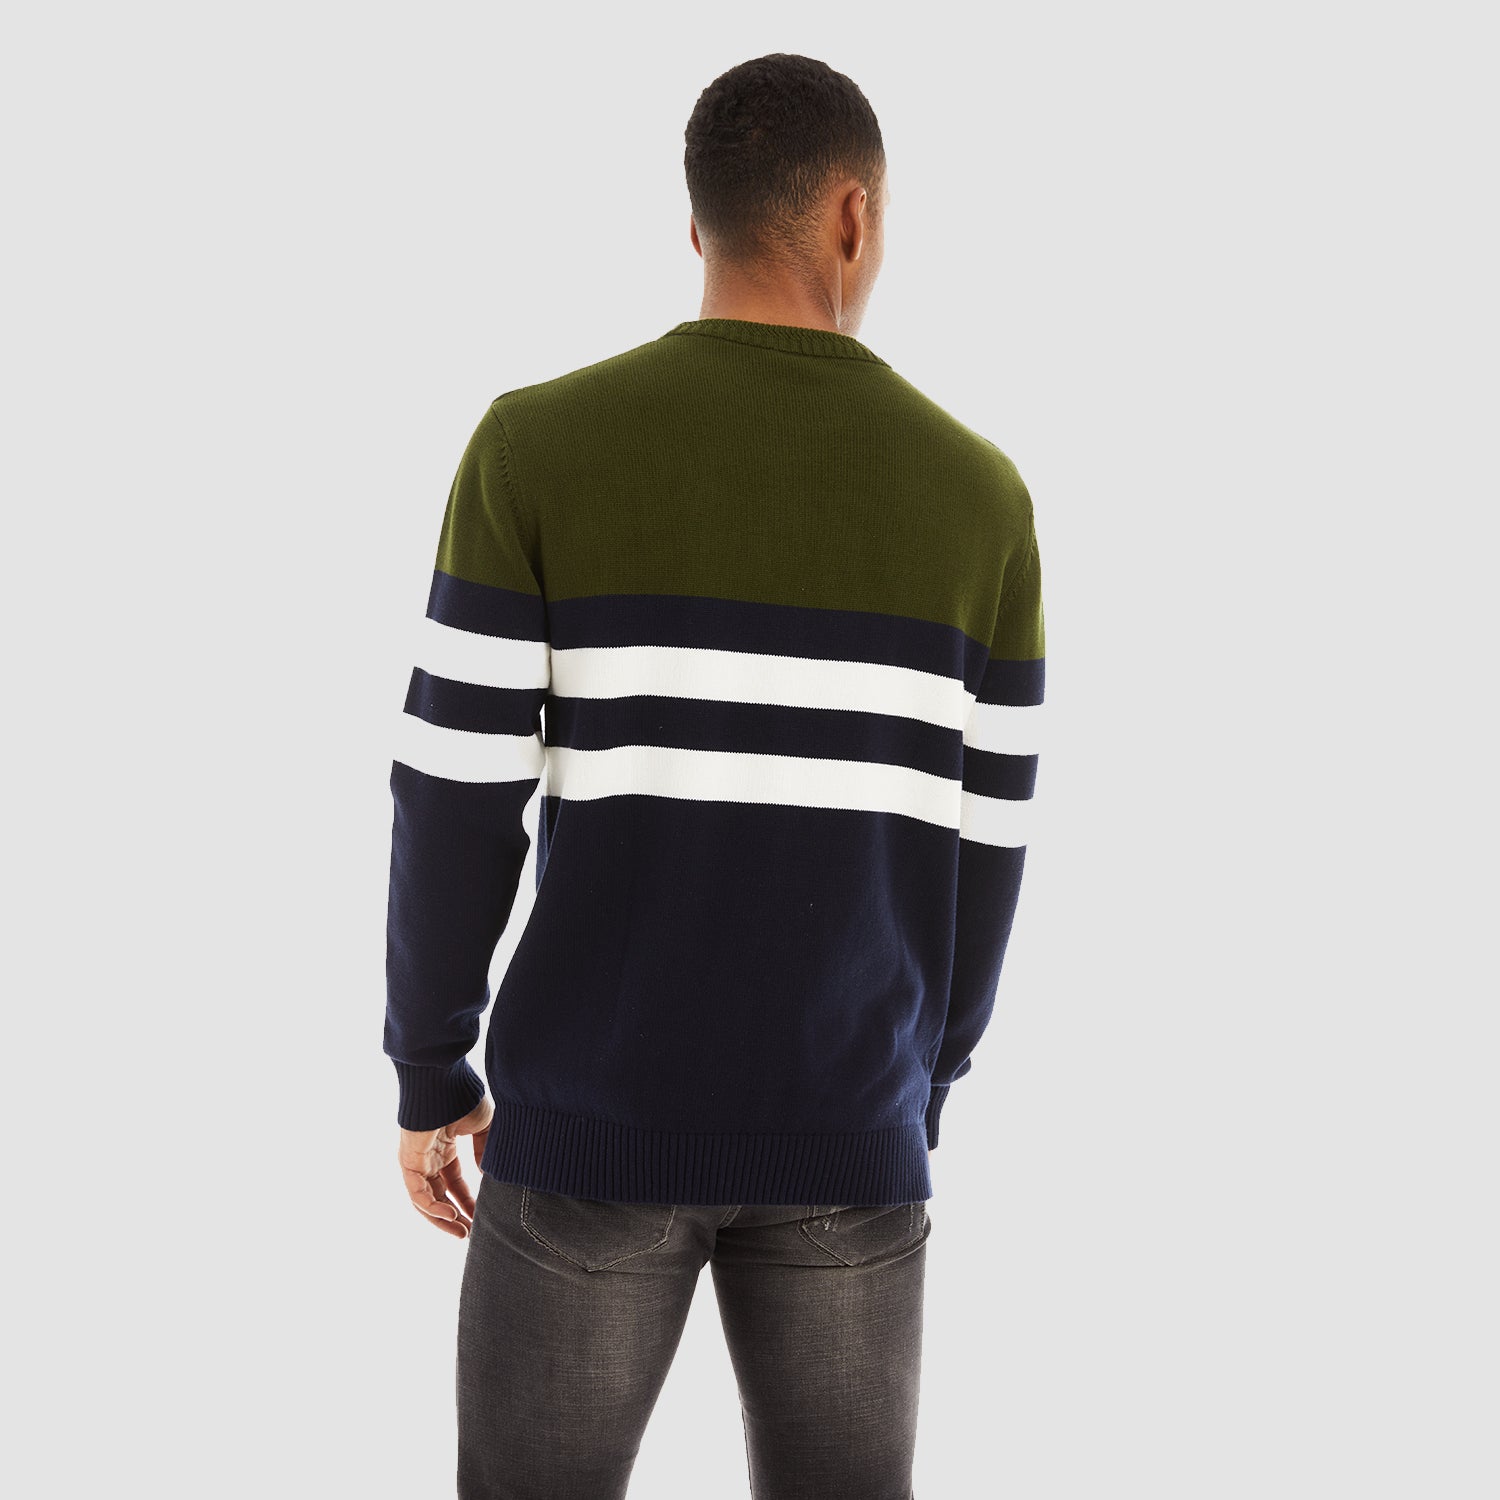 Men's Crewneck Sweater Soft Thermal Knitted Sweatshirt Color Block Striped